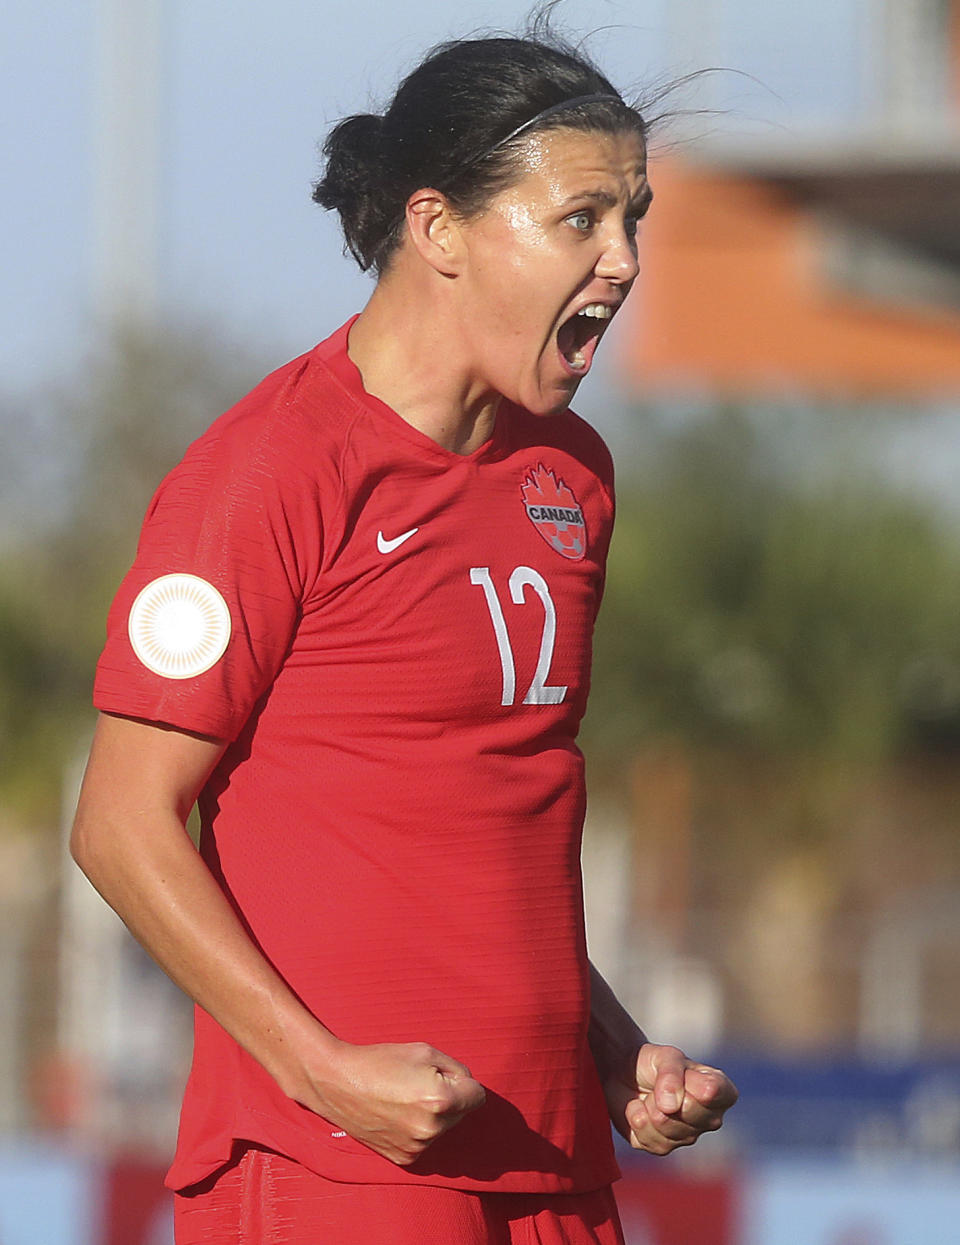 Canada's Christine Sinclair celebrates after scoring against St. Kitts and Nevis during a CONCACAF women's Olympic qualifying soccer match Wednesday, Jan. 29, 2020, in Edinburg, Texas. Sinclair passed Abby Wambach's record for goals. (Joel Martinez/The Monitor via AP)